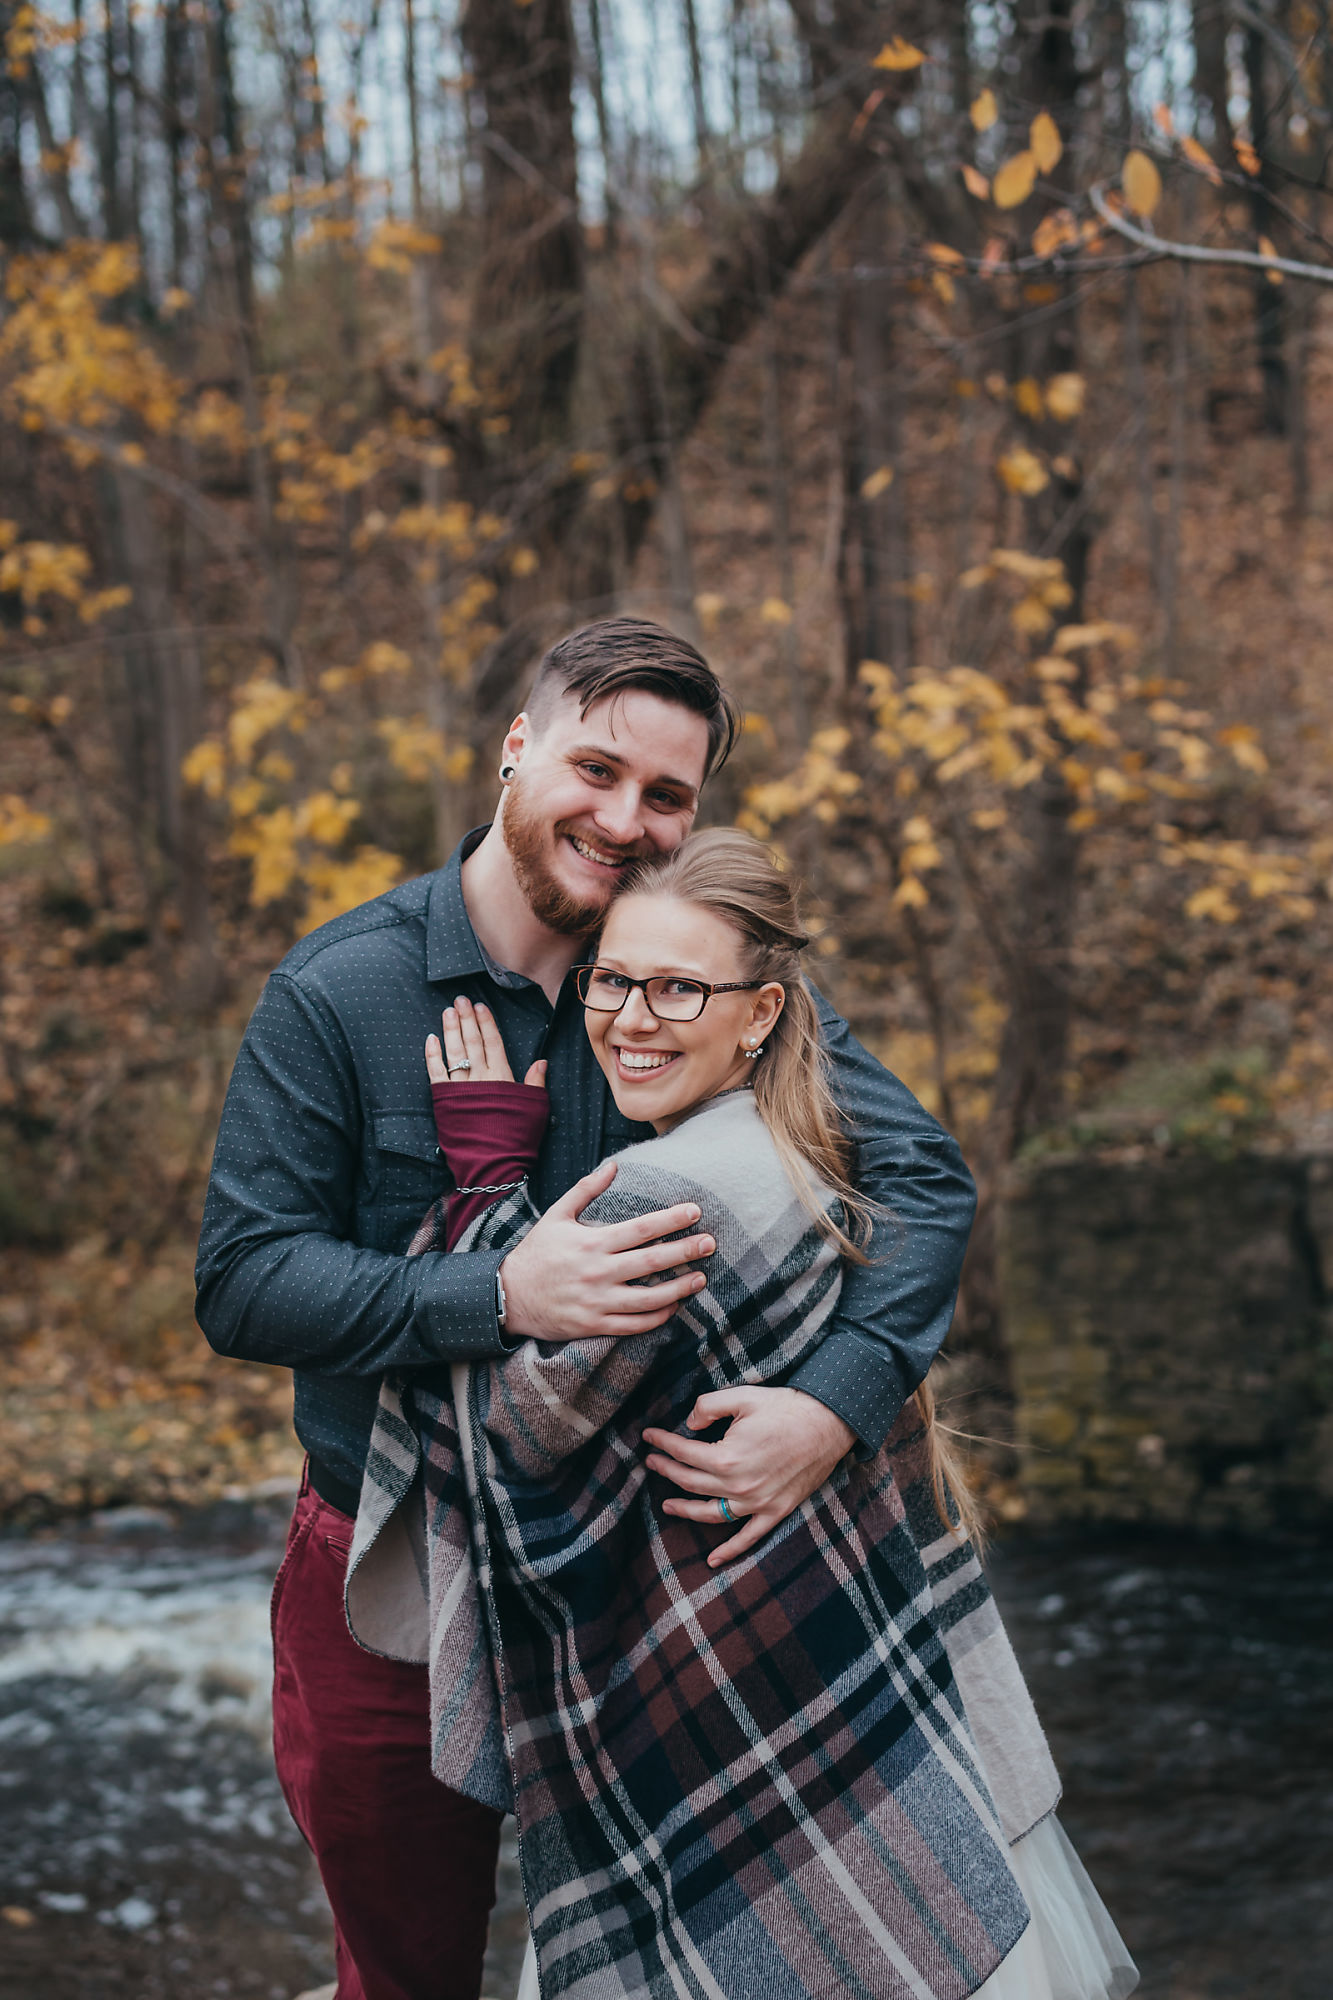 Dan and Nina pose along the shore of Smokey Hollow Falls during their fall engagement session with Dundas engagement photographer Jennifer Blaak.